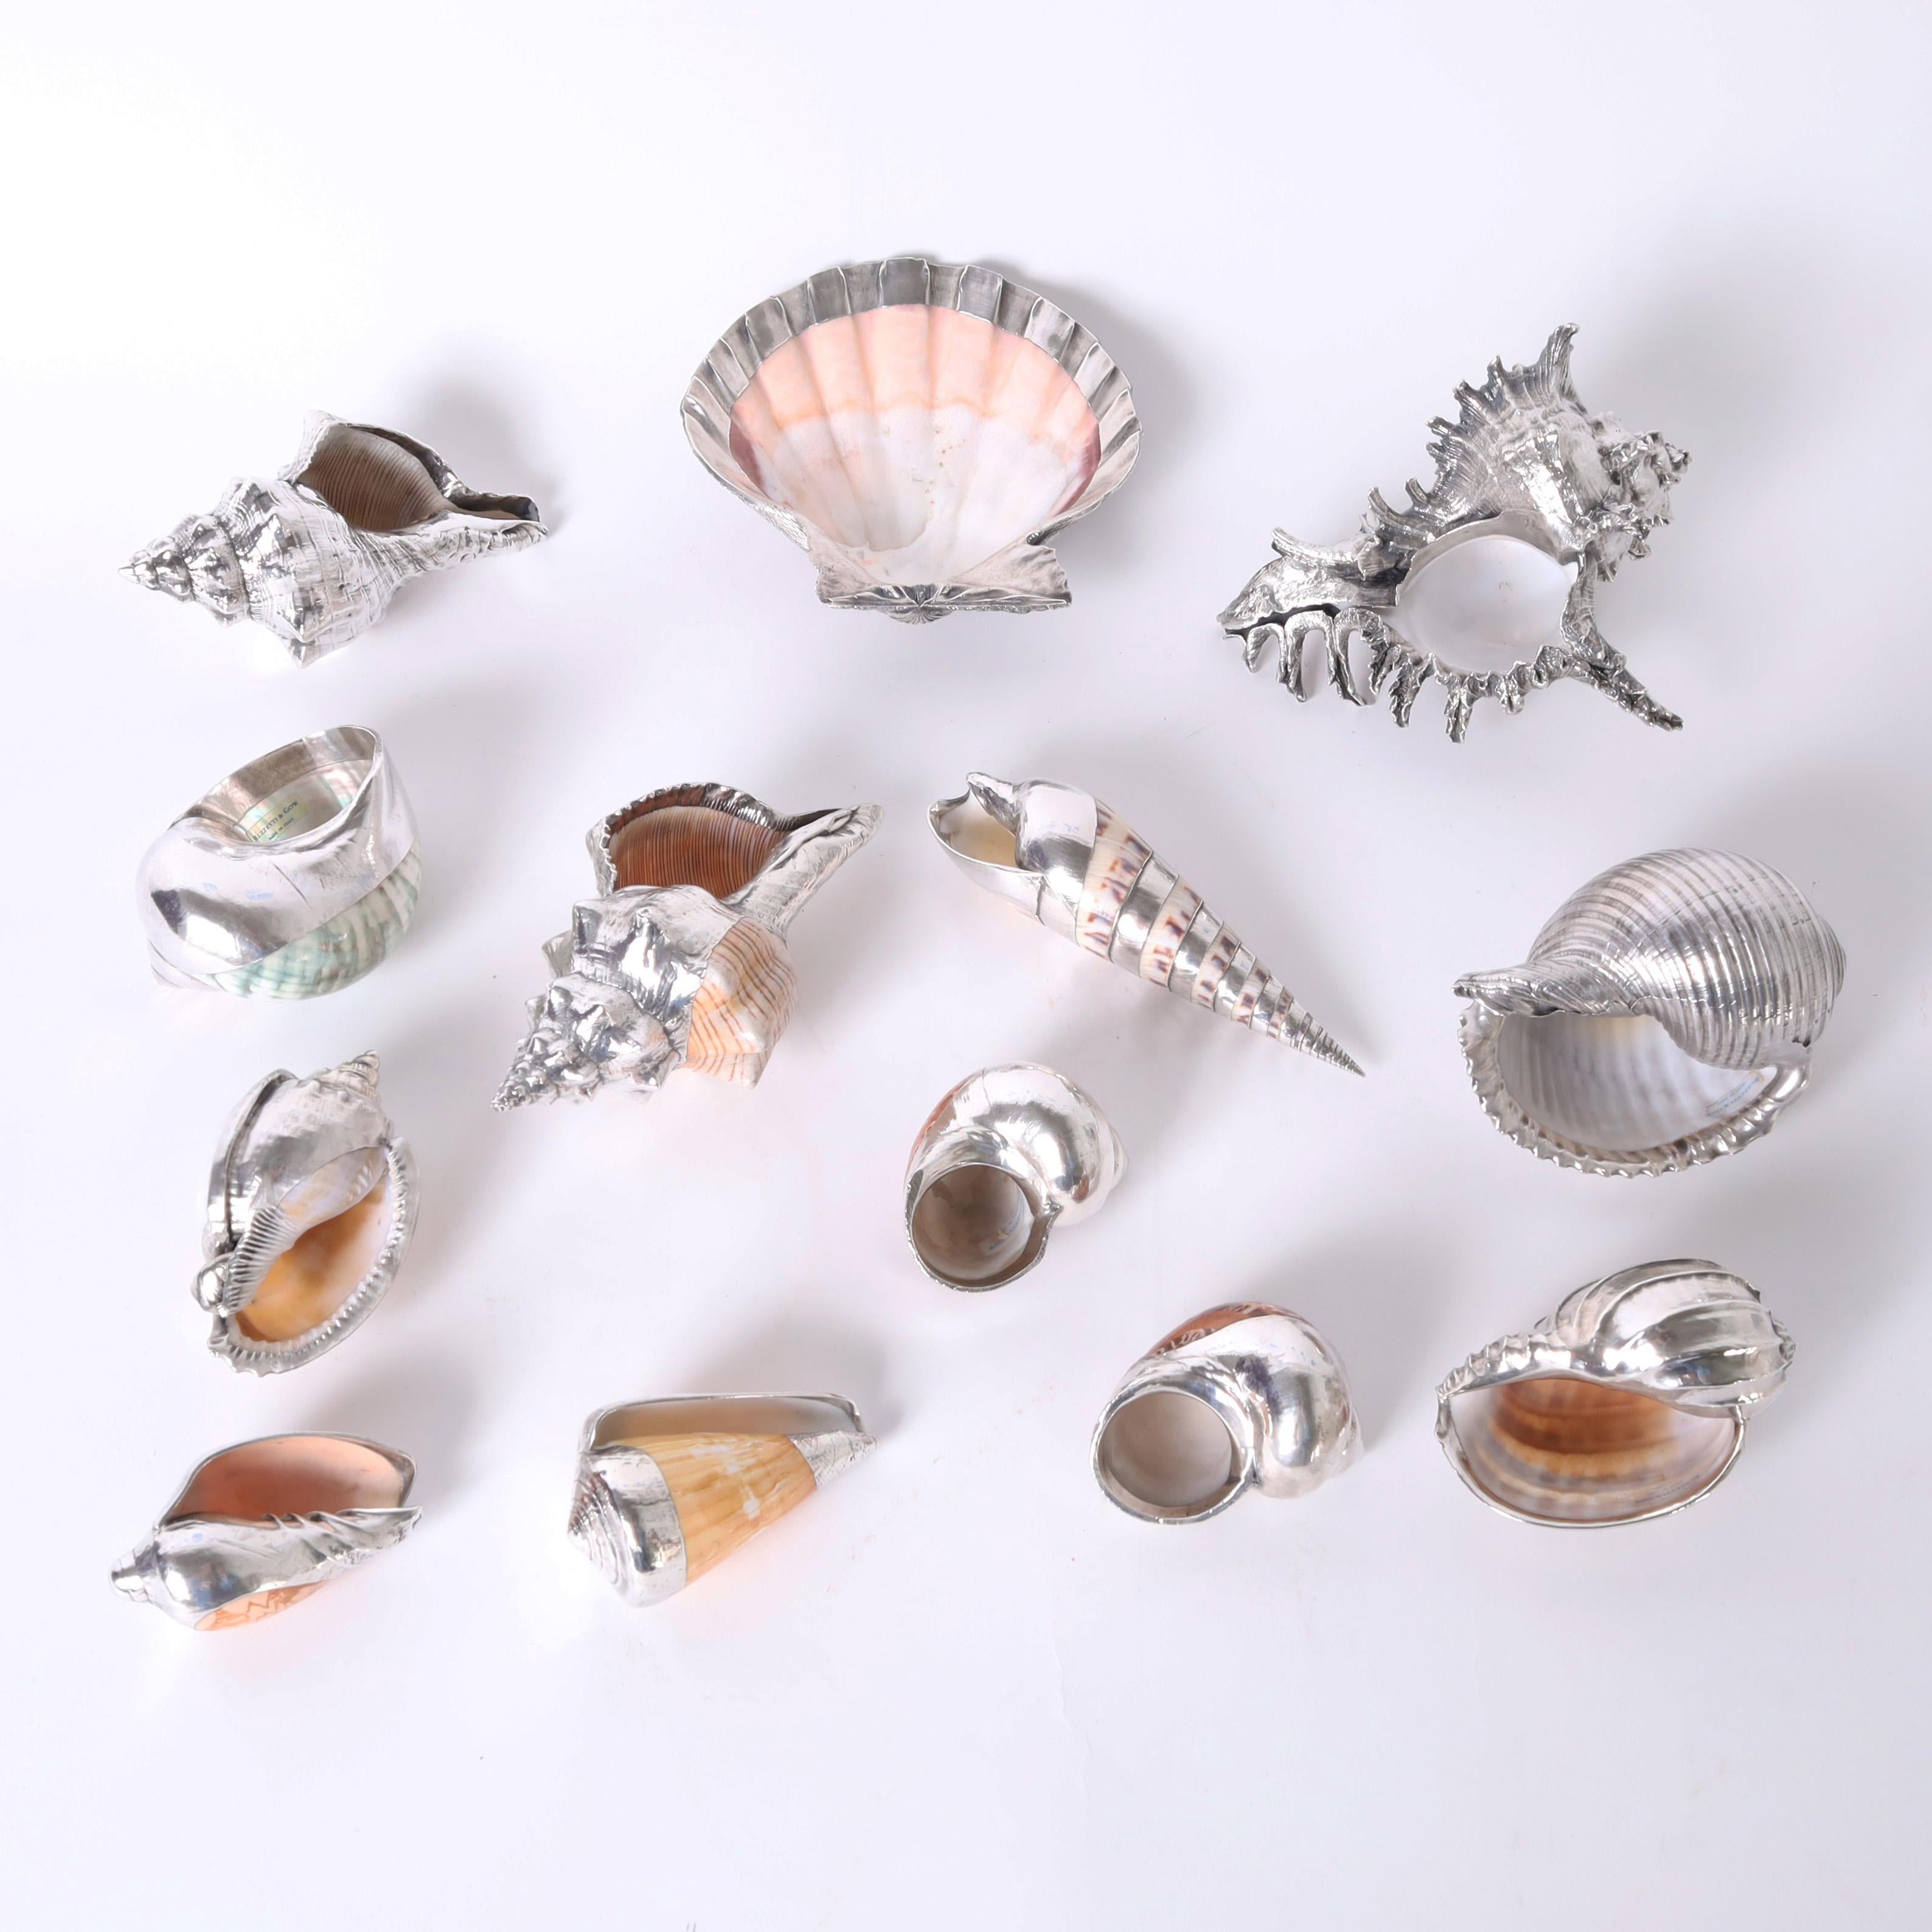 Enticing group of thirteen vintage seashells representing exotic species enhanced with silver plate. Signed Ruzzetti and Gow Italy.

Sizes range from:

H: 3 W: 2 D: 3 
H: 6 W: 6 D: 1